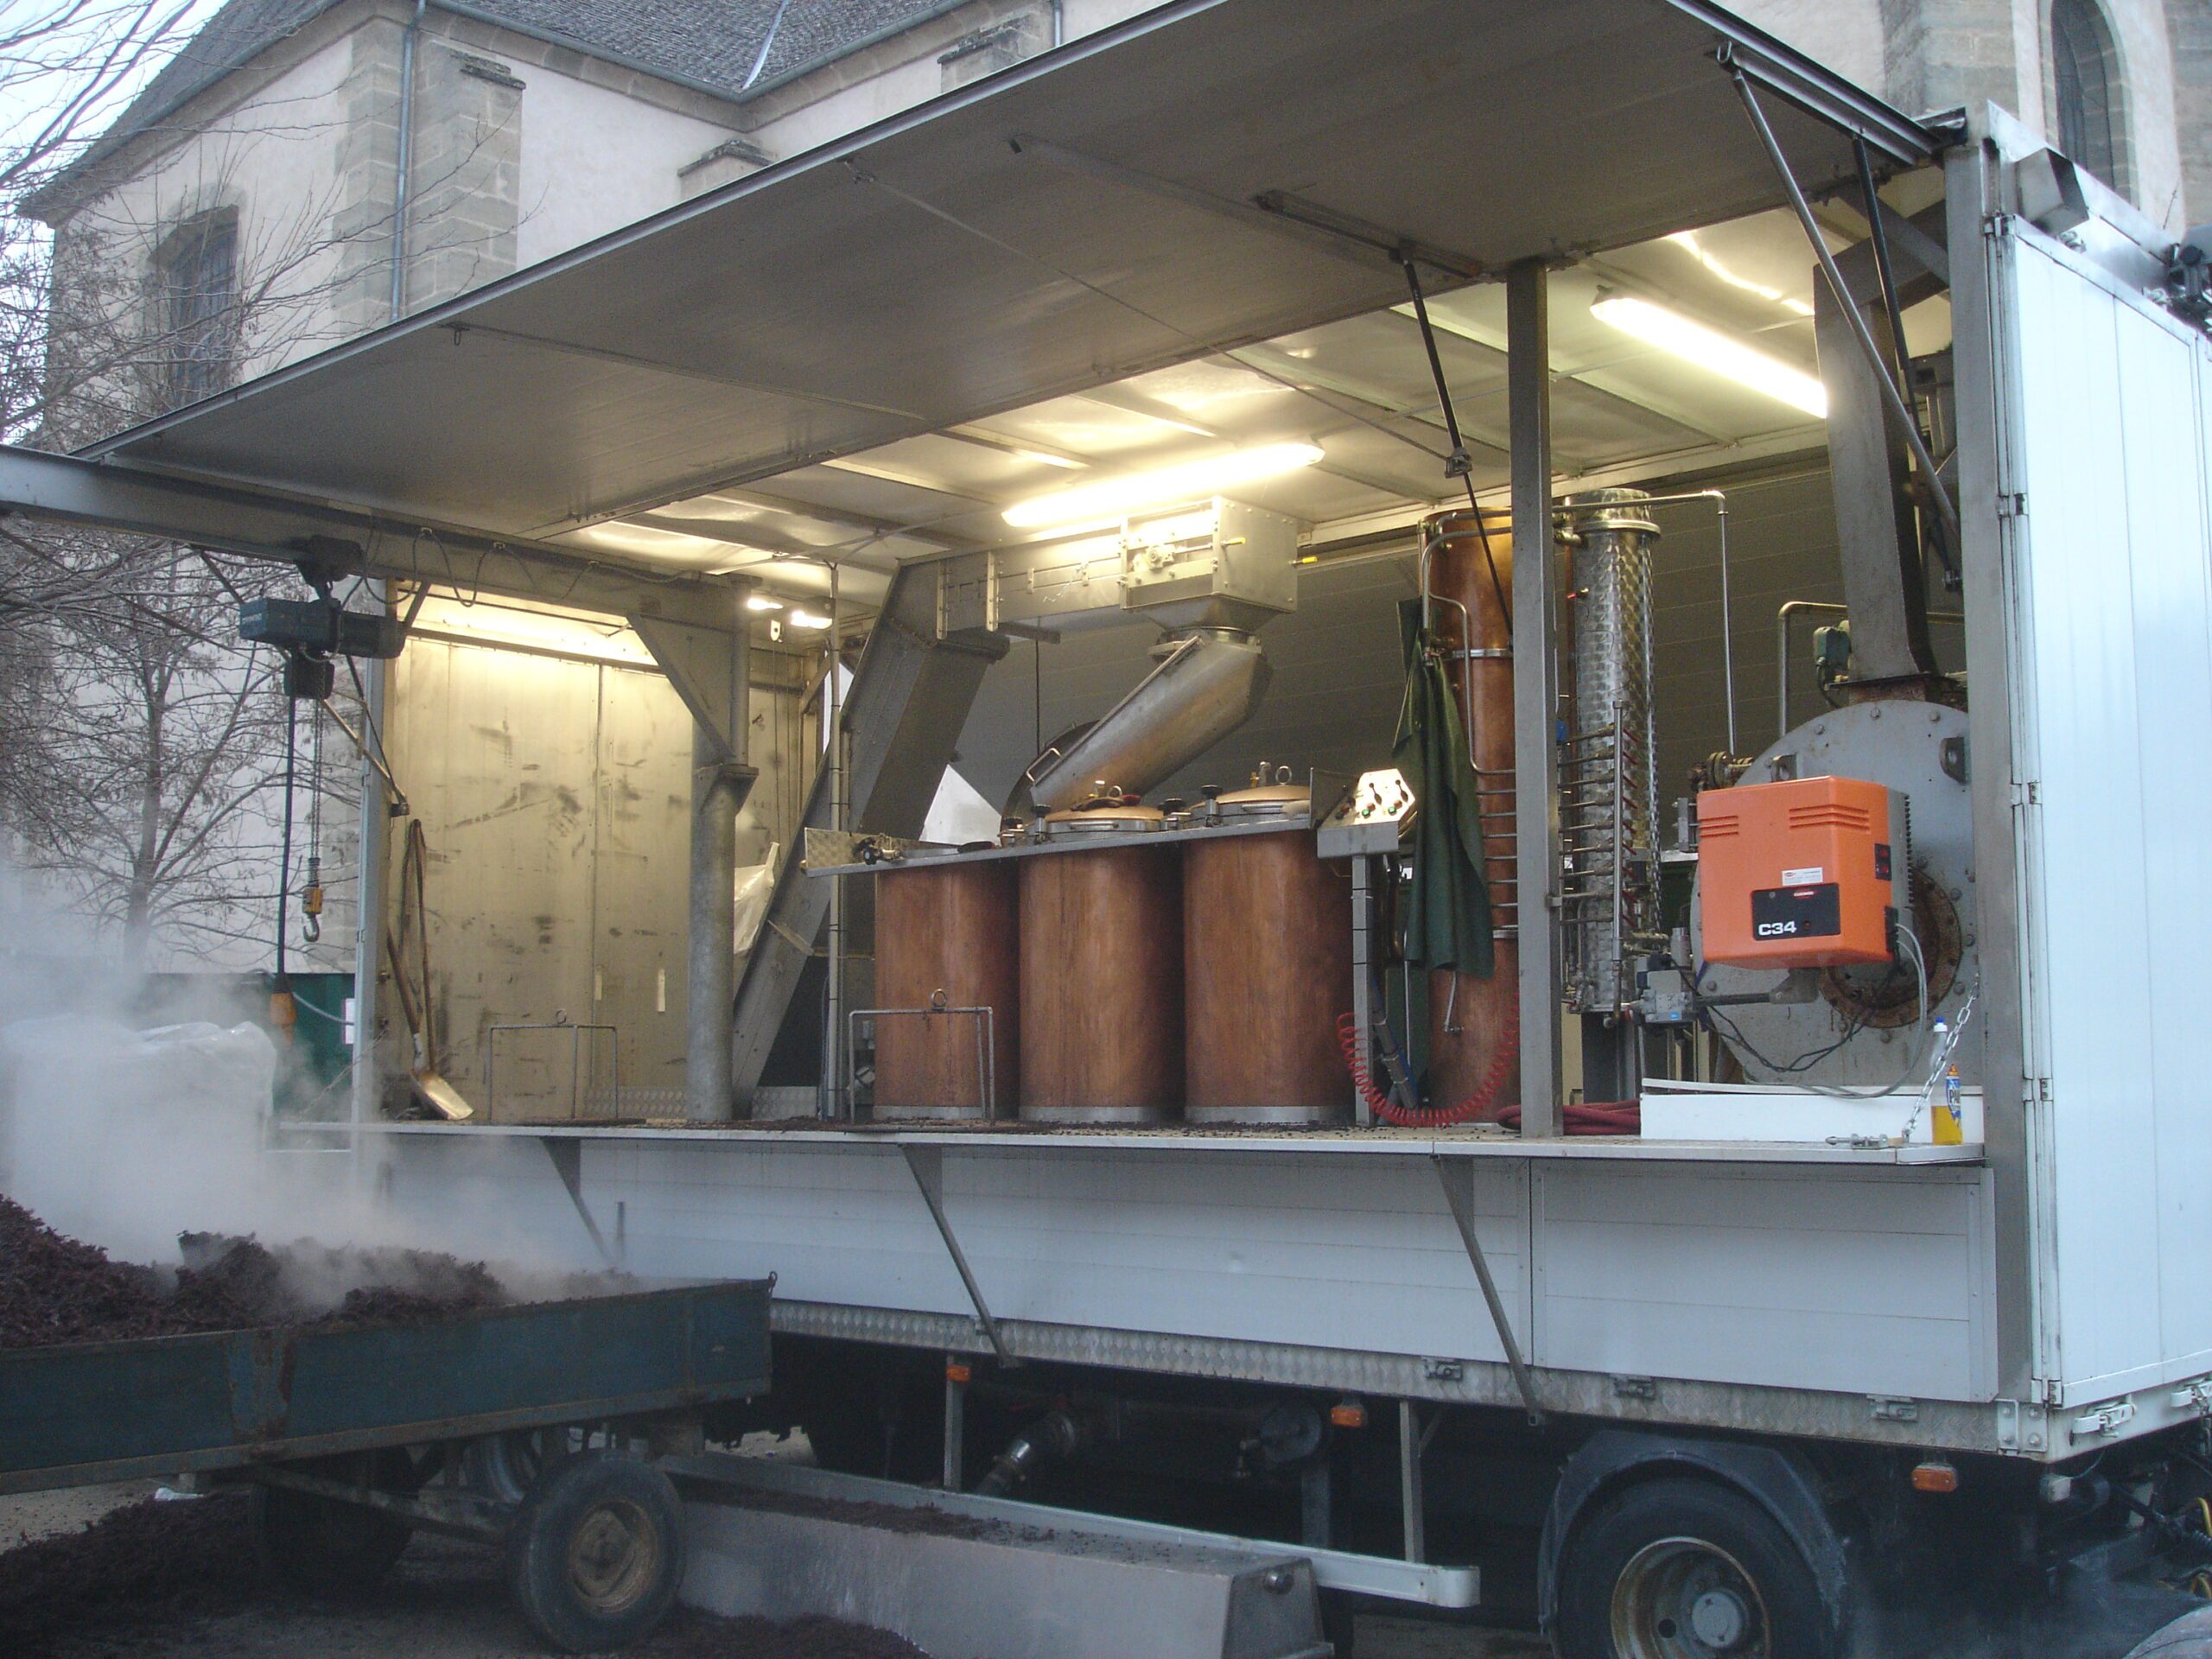 The Mobile Distillery